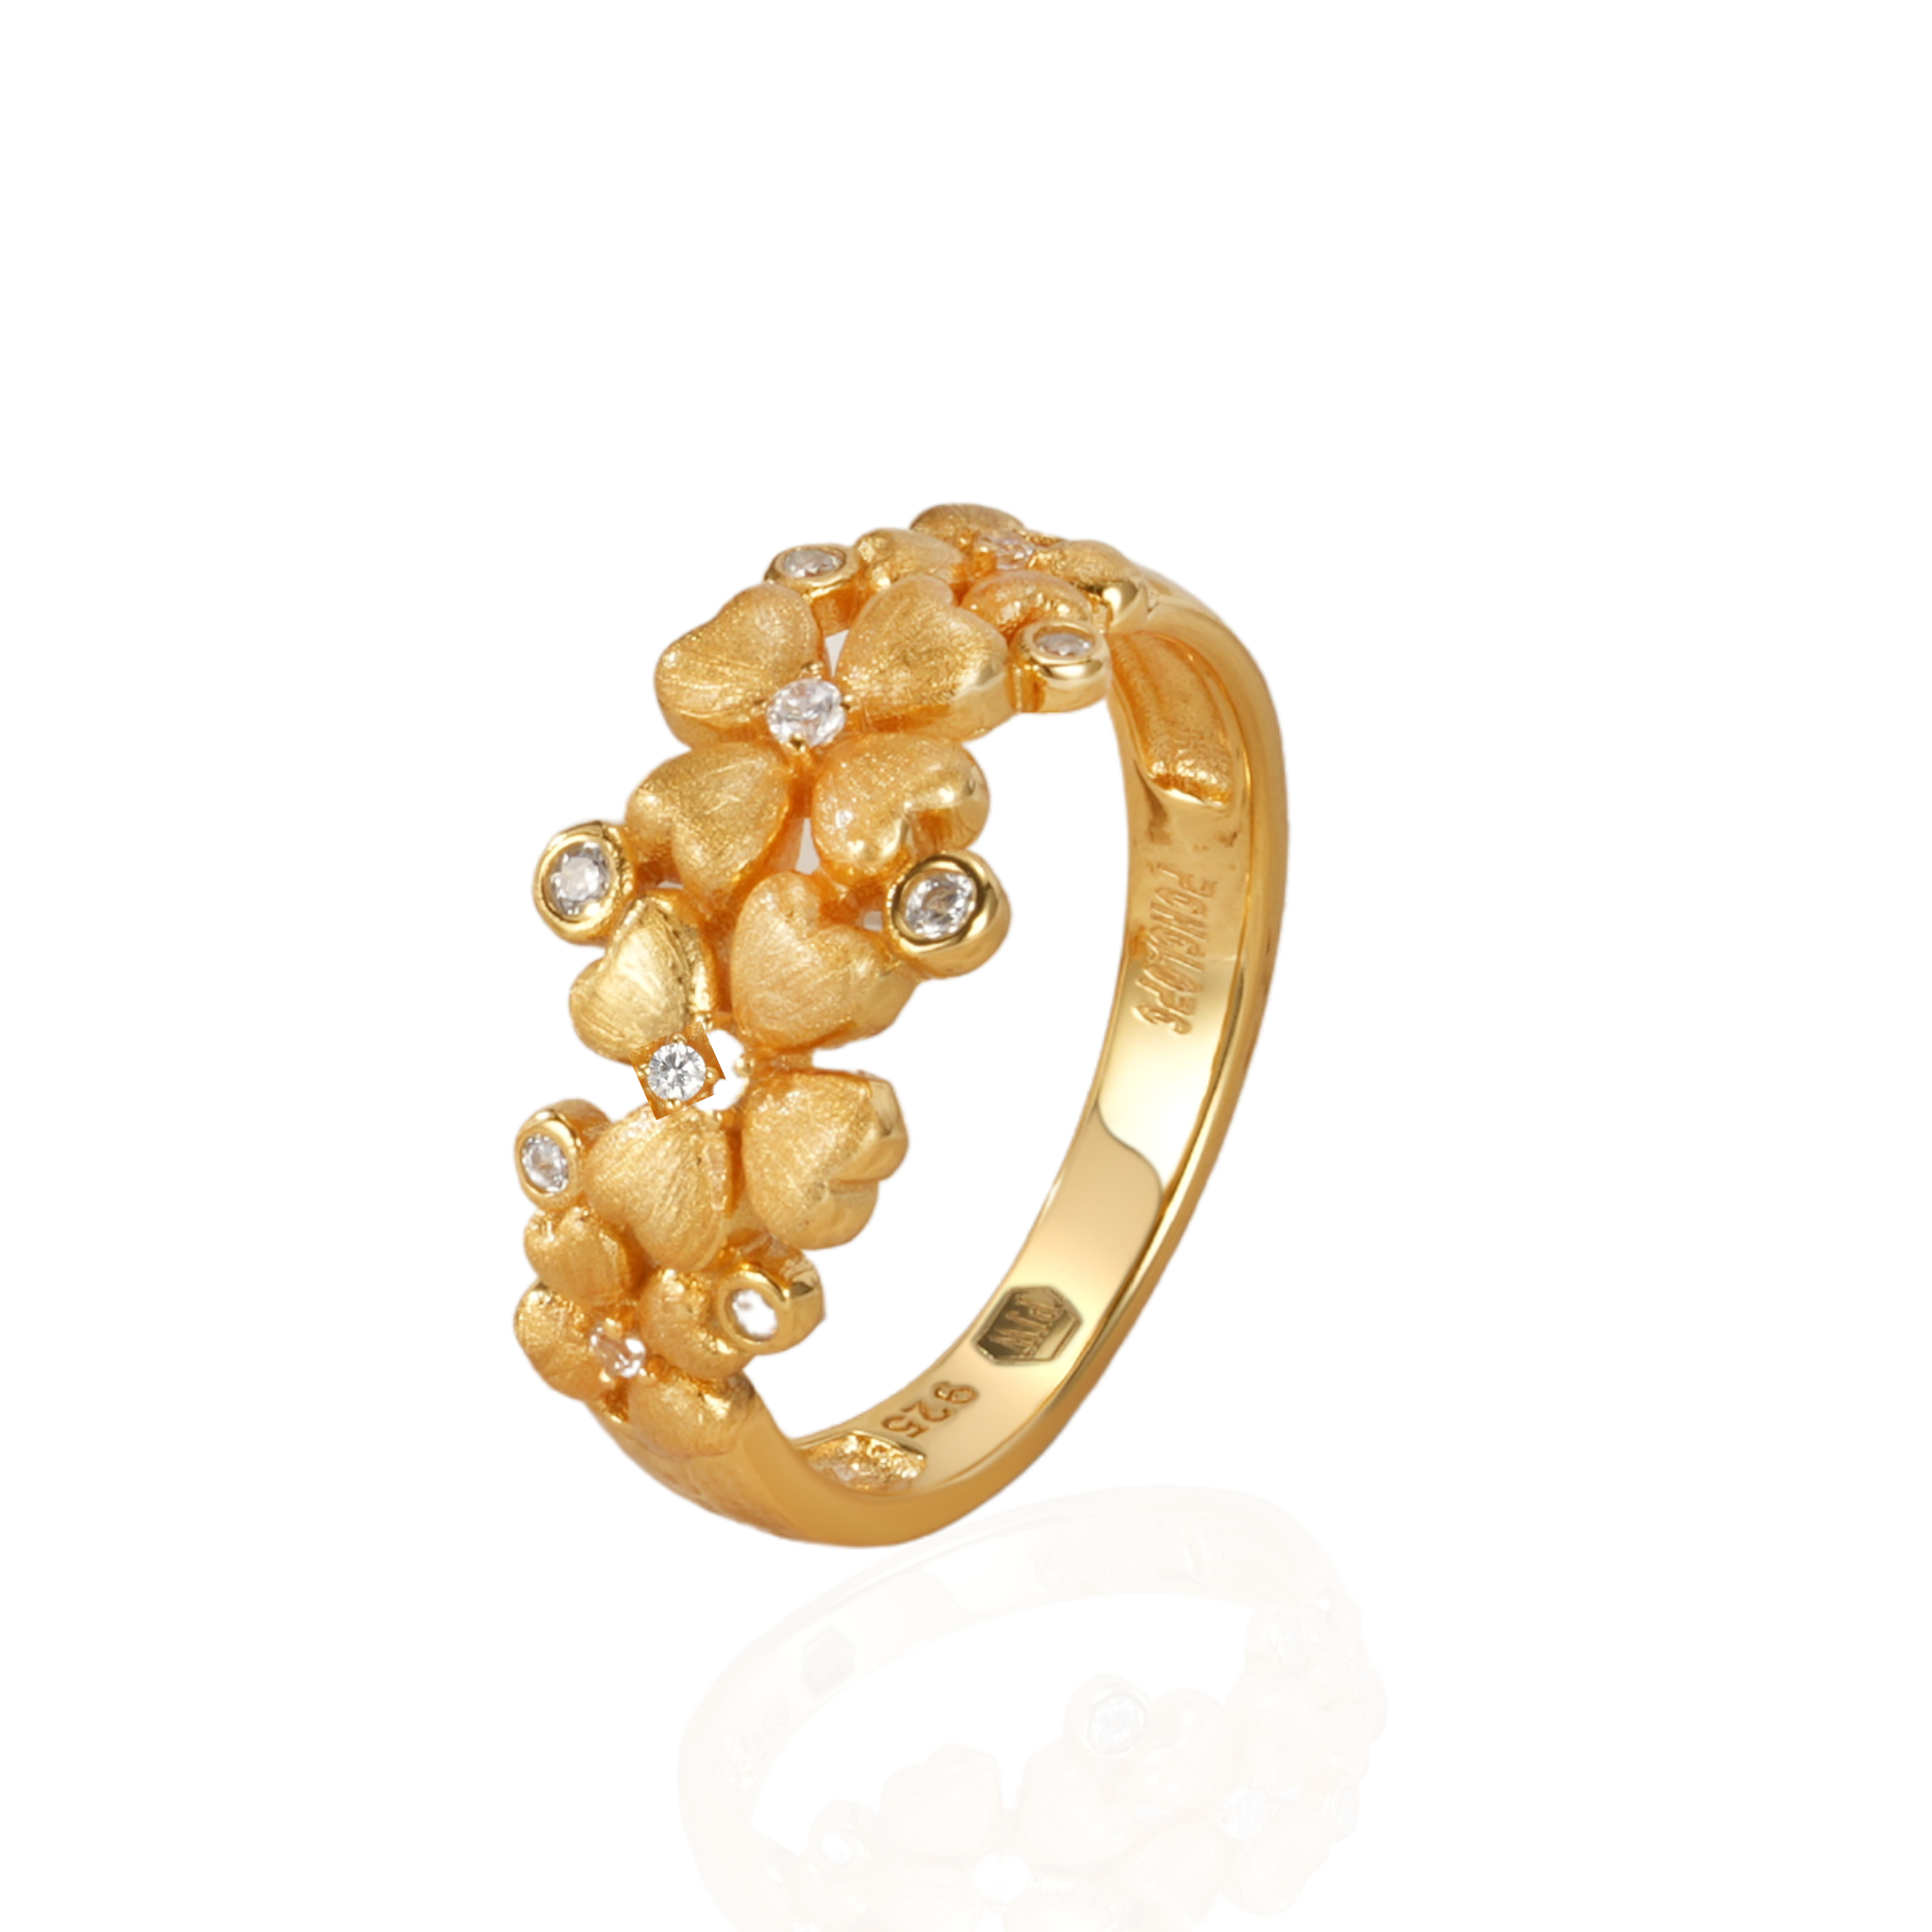 Floral silver ring, pink gold plated with zirconia stones.